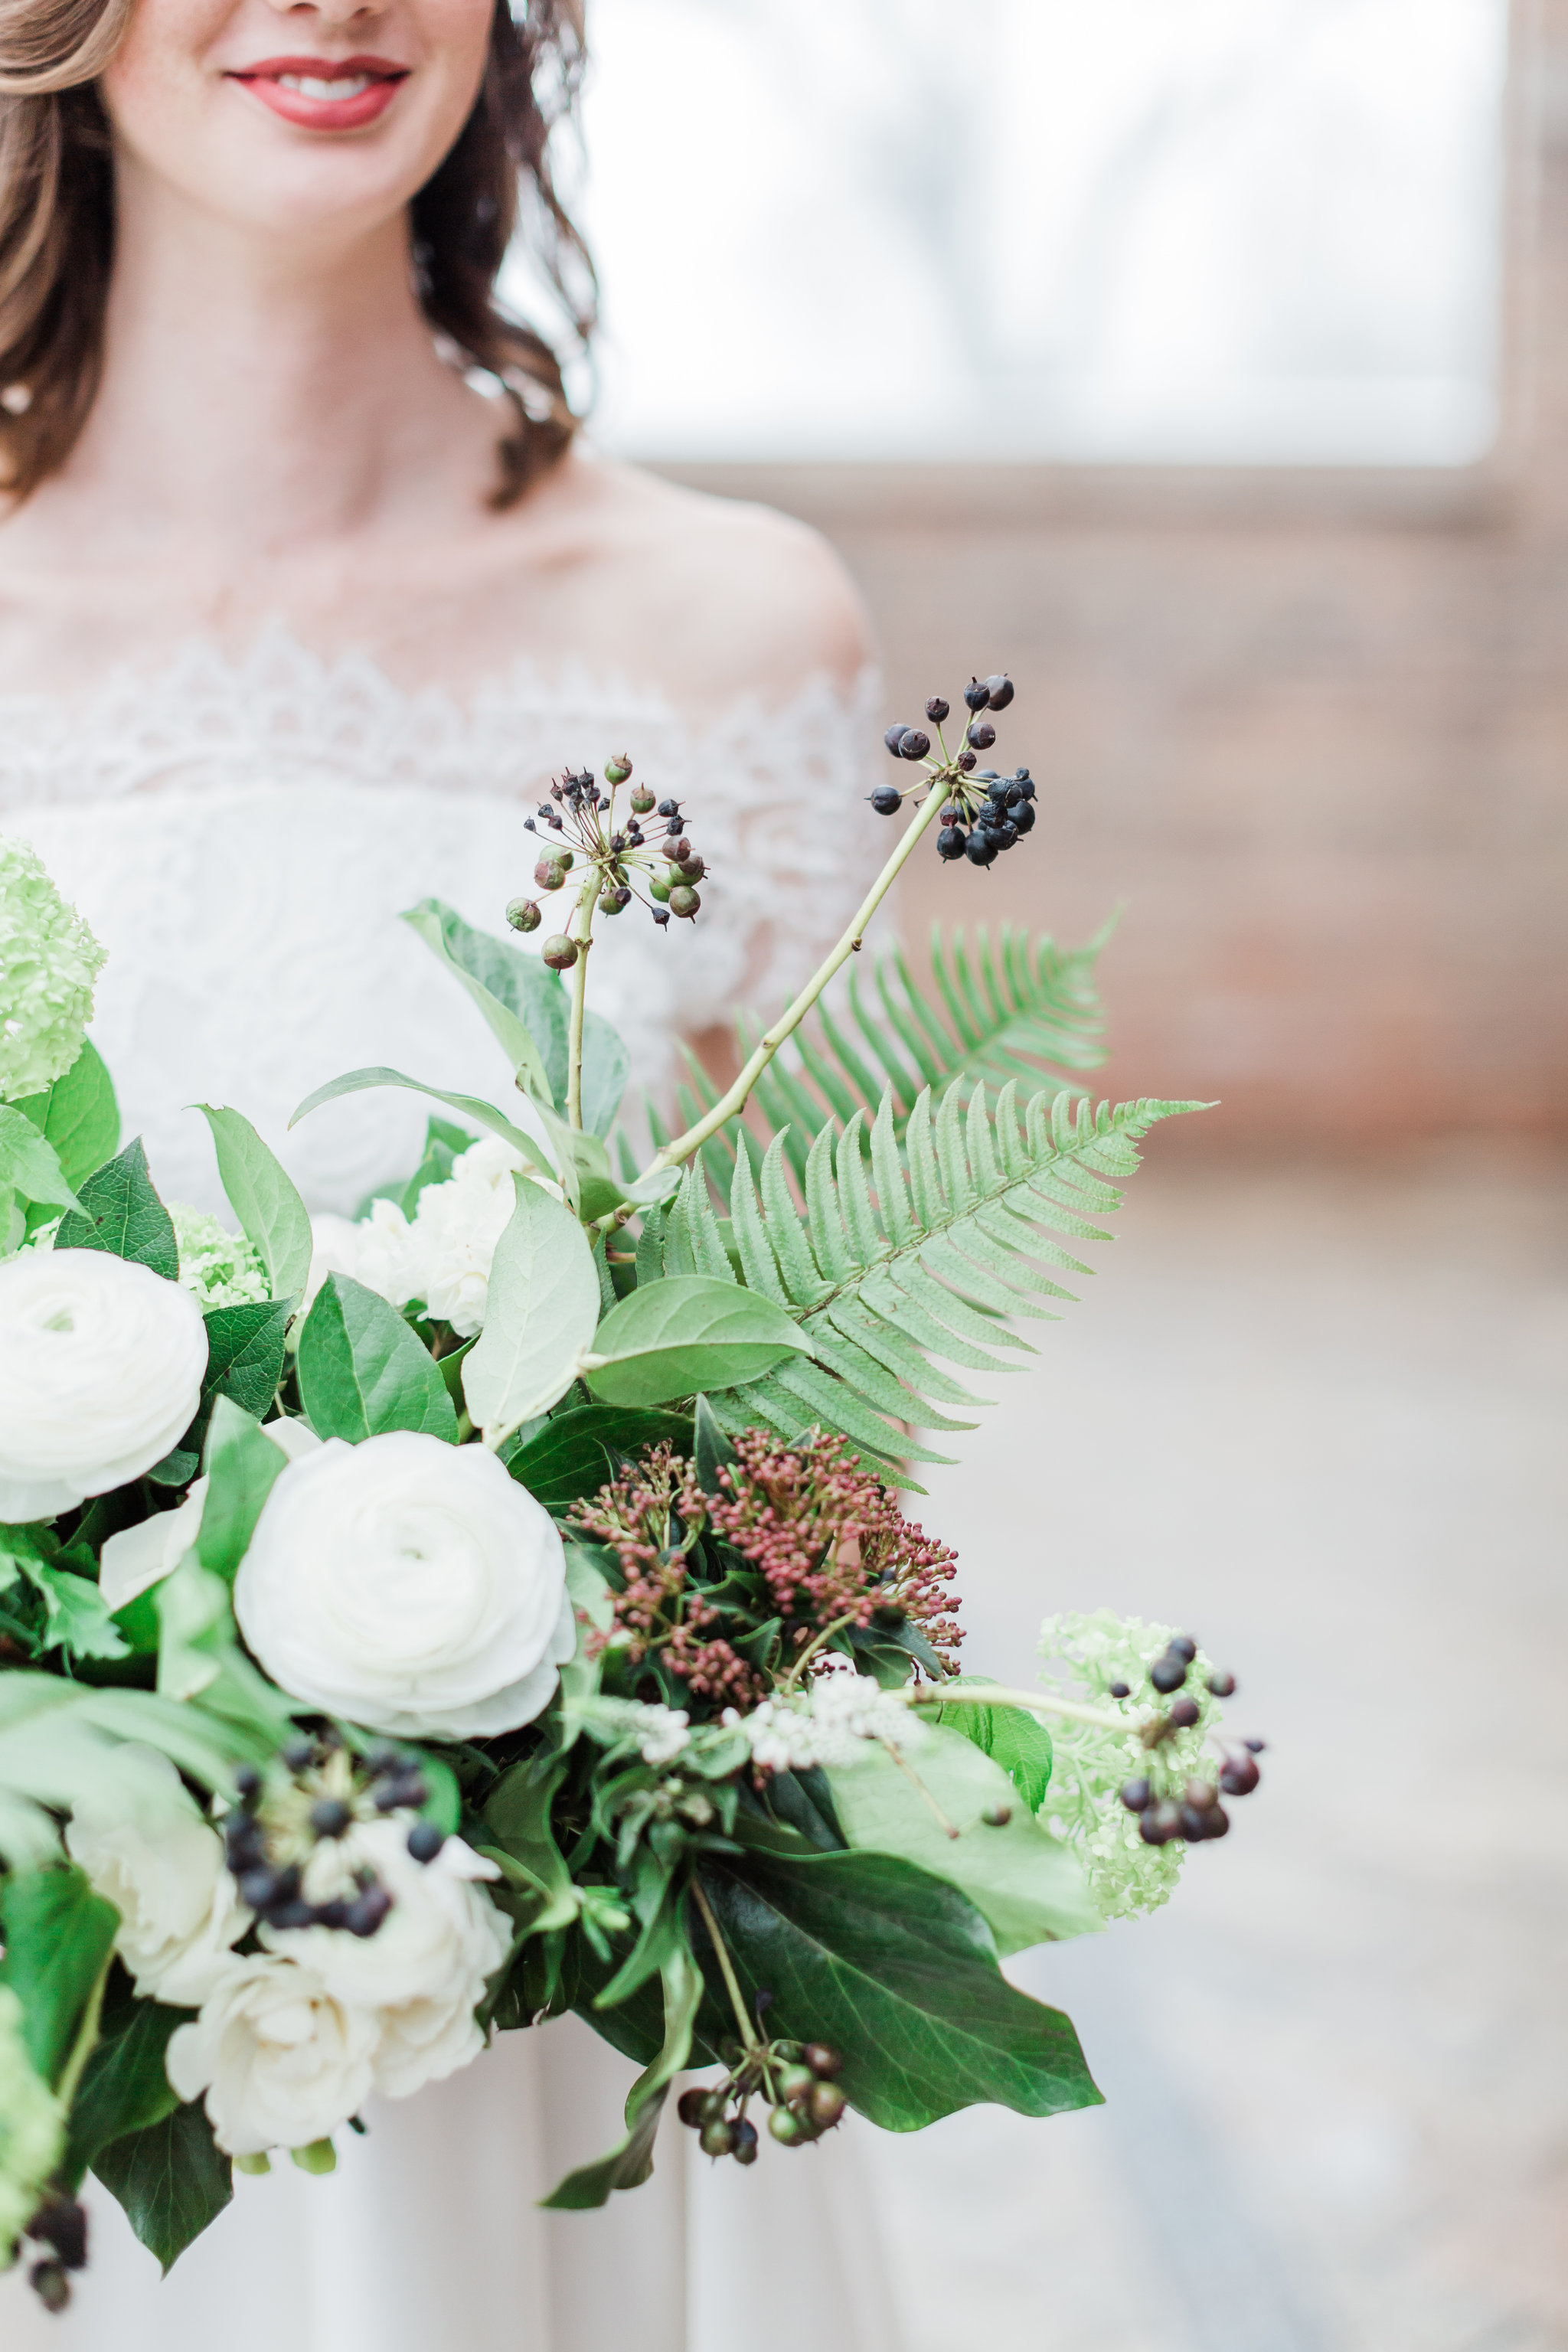 Neutral colored winter wedding bouquet in white, green, and navy. With ranunculus, spray roses, fern, and berries.